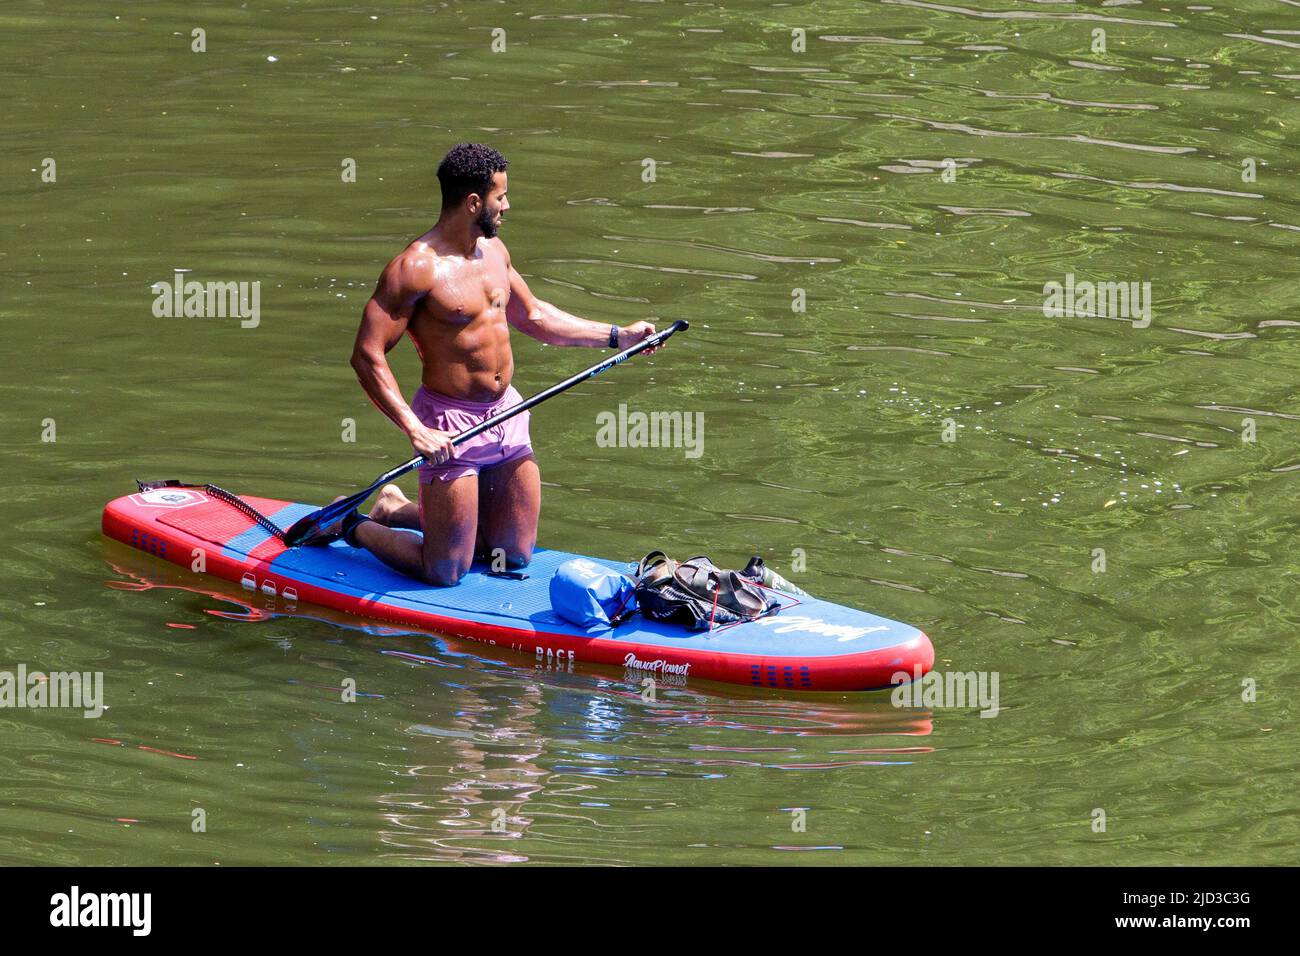 Bath, UK, 17th June, 2022. With many parts of the UK enjoying another very hot and sunny day, a paddleboarder is pictured enjoying the hot weather on the River Avon in front of Pulteney Bridge. Credit: Lynchpics/Alamy Live News Stock Photo